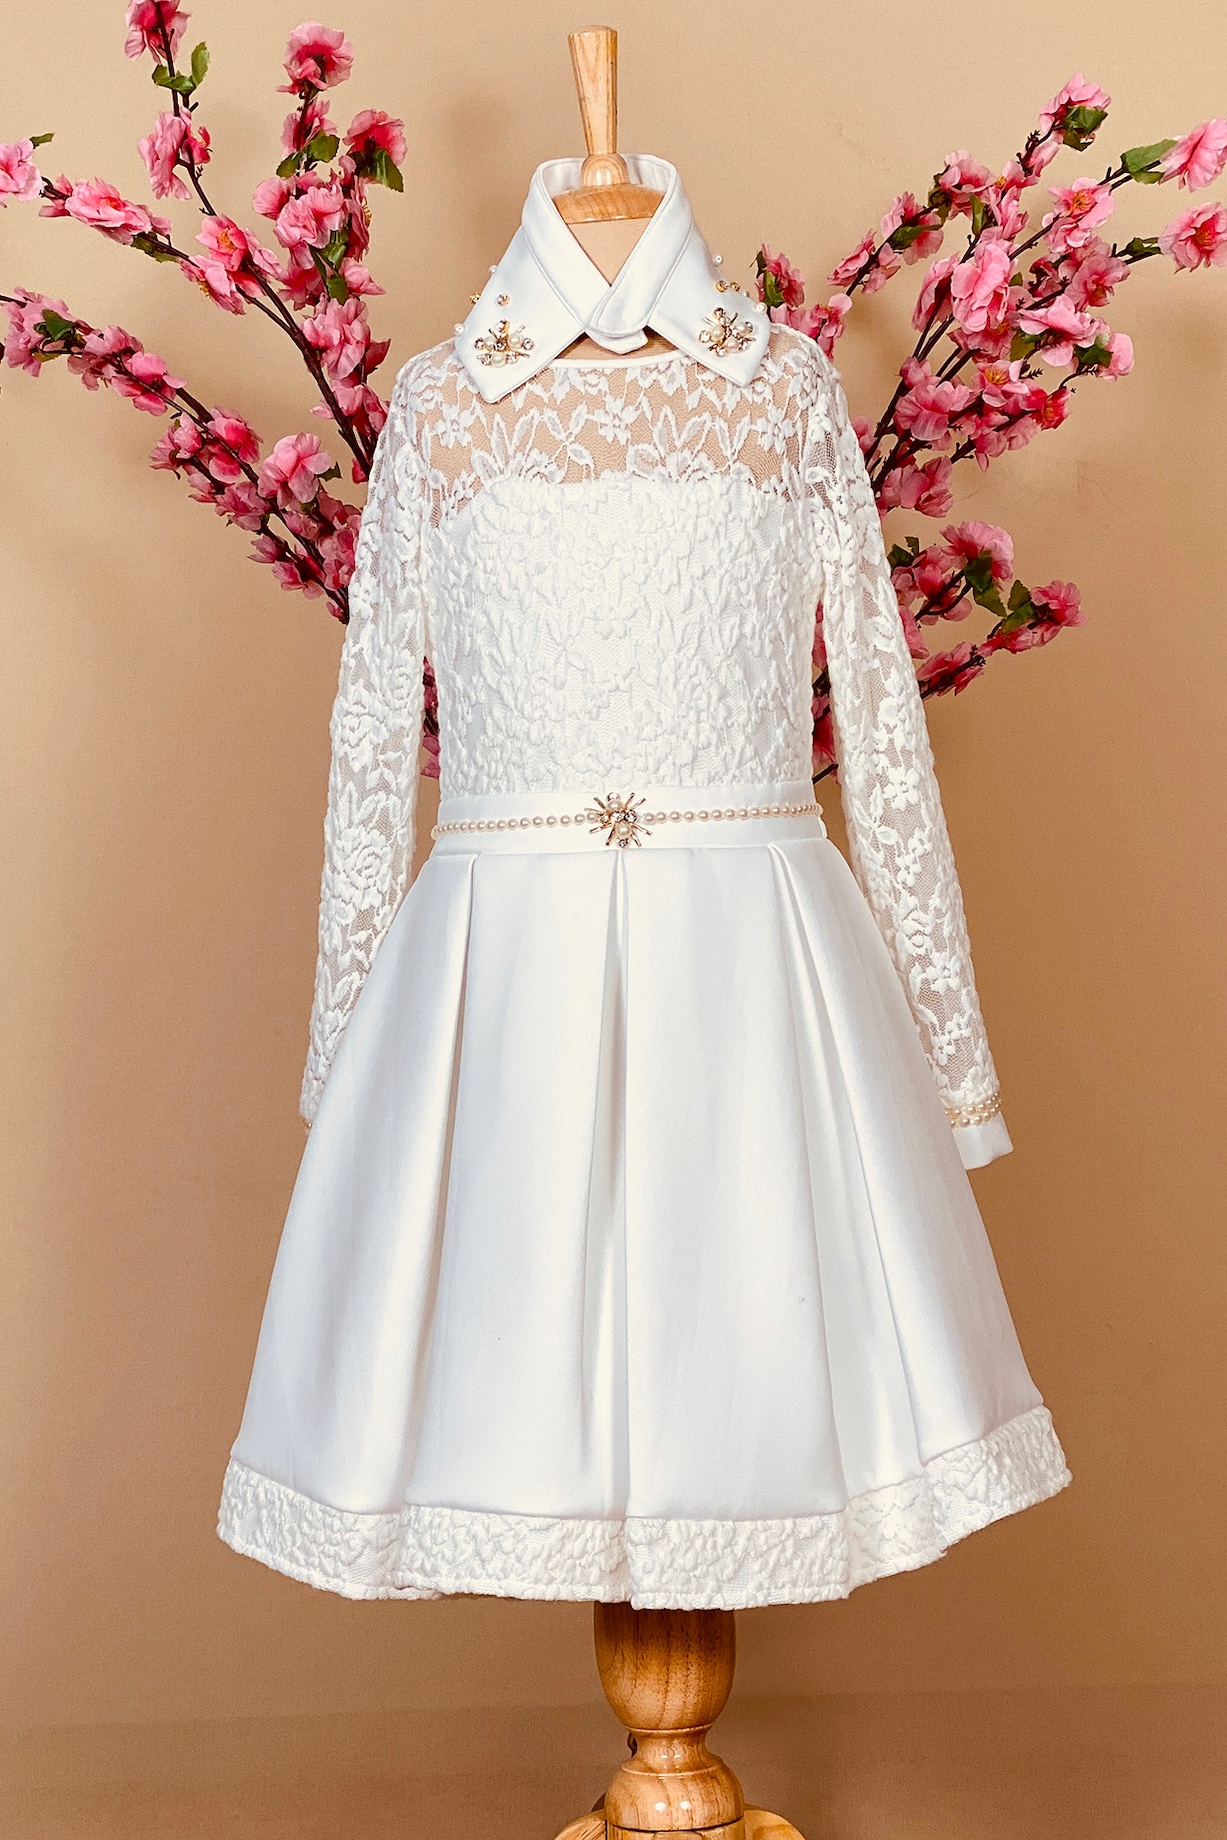 White Lace Dress For Girls Design by Little Vogue Club at Pernia's